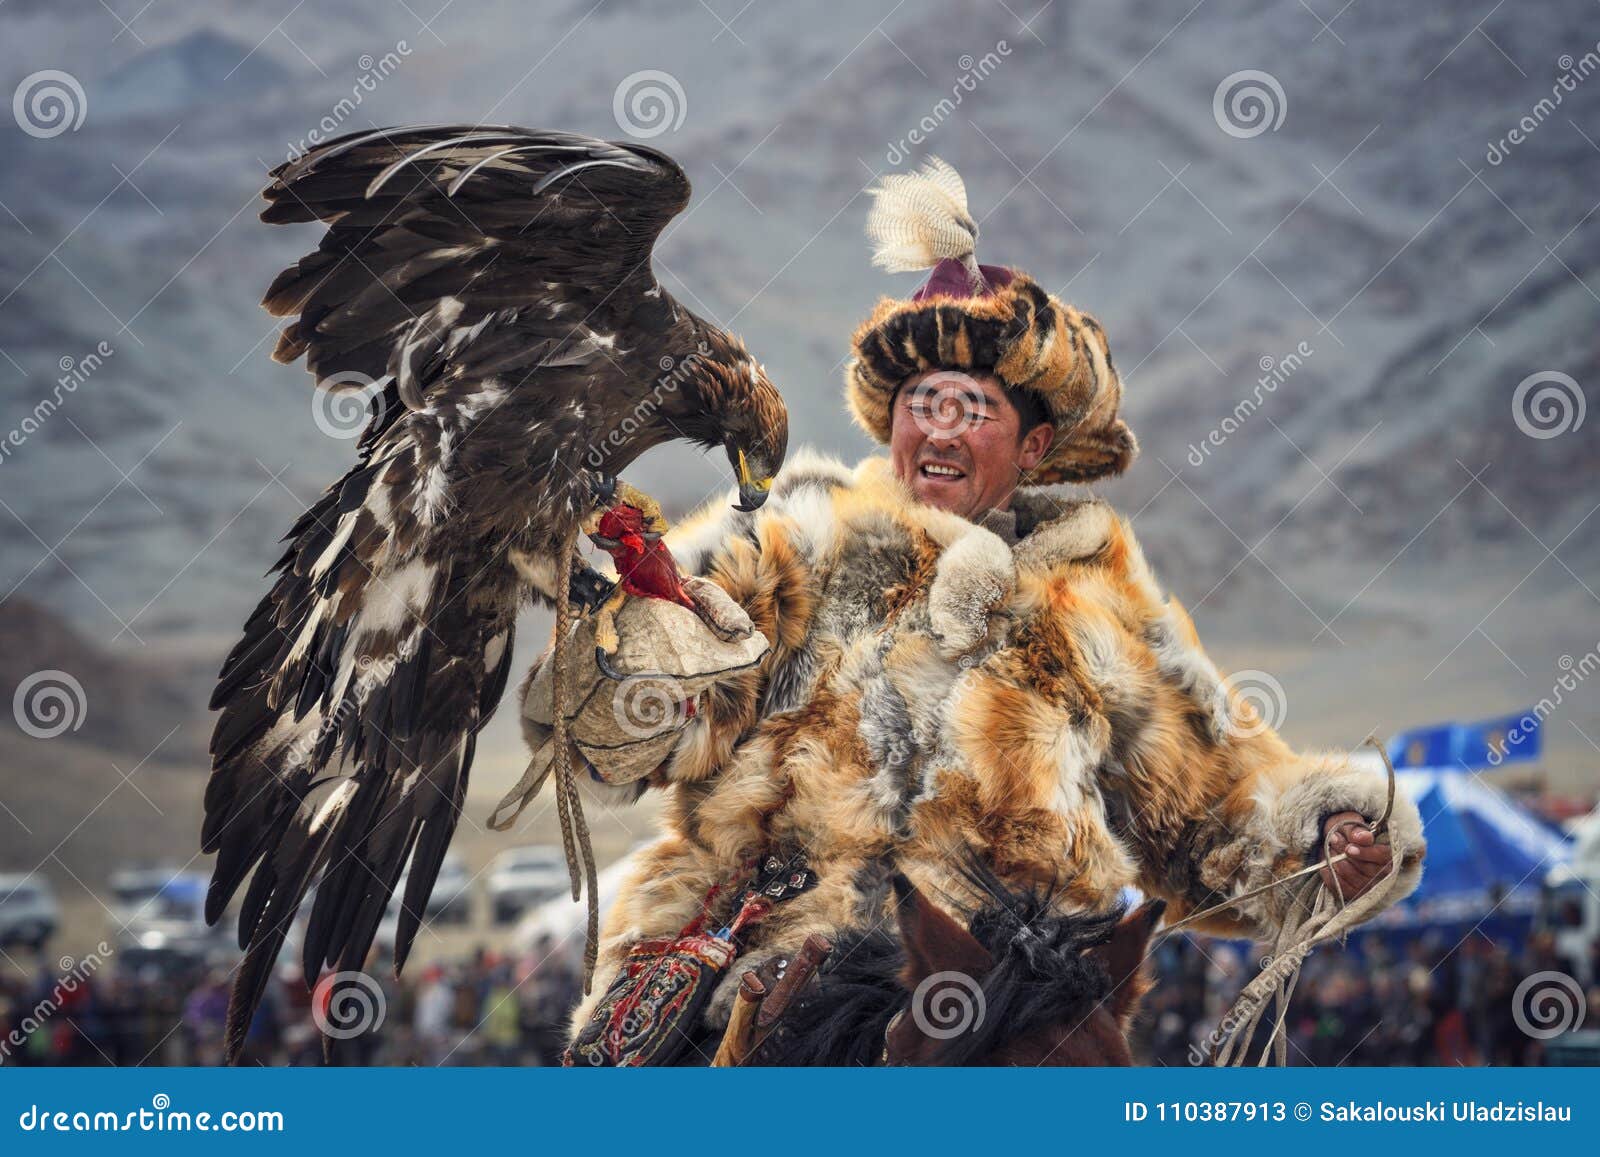 Mongolia Traditional Golden Eagle Festival Unknown